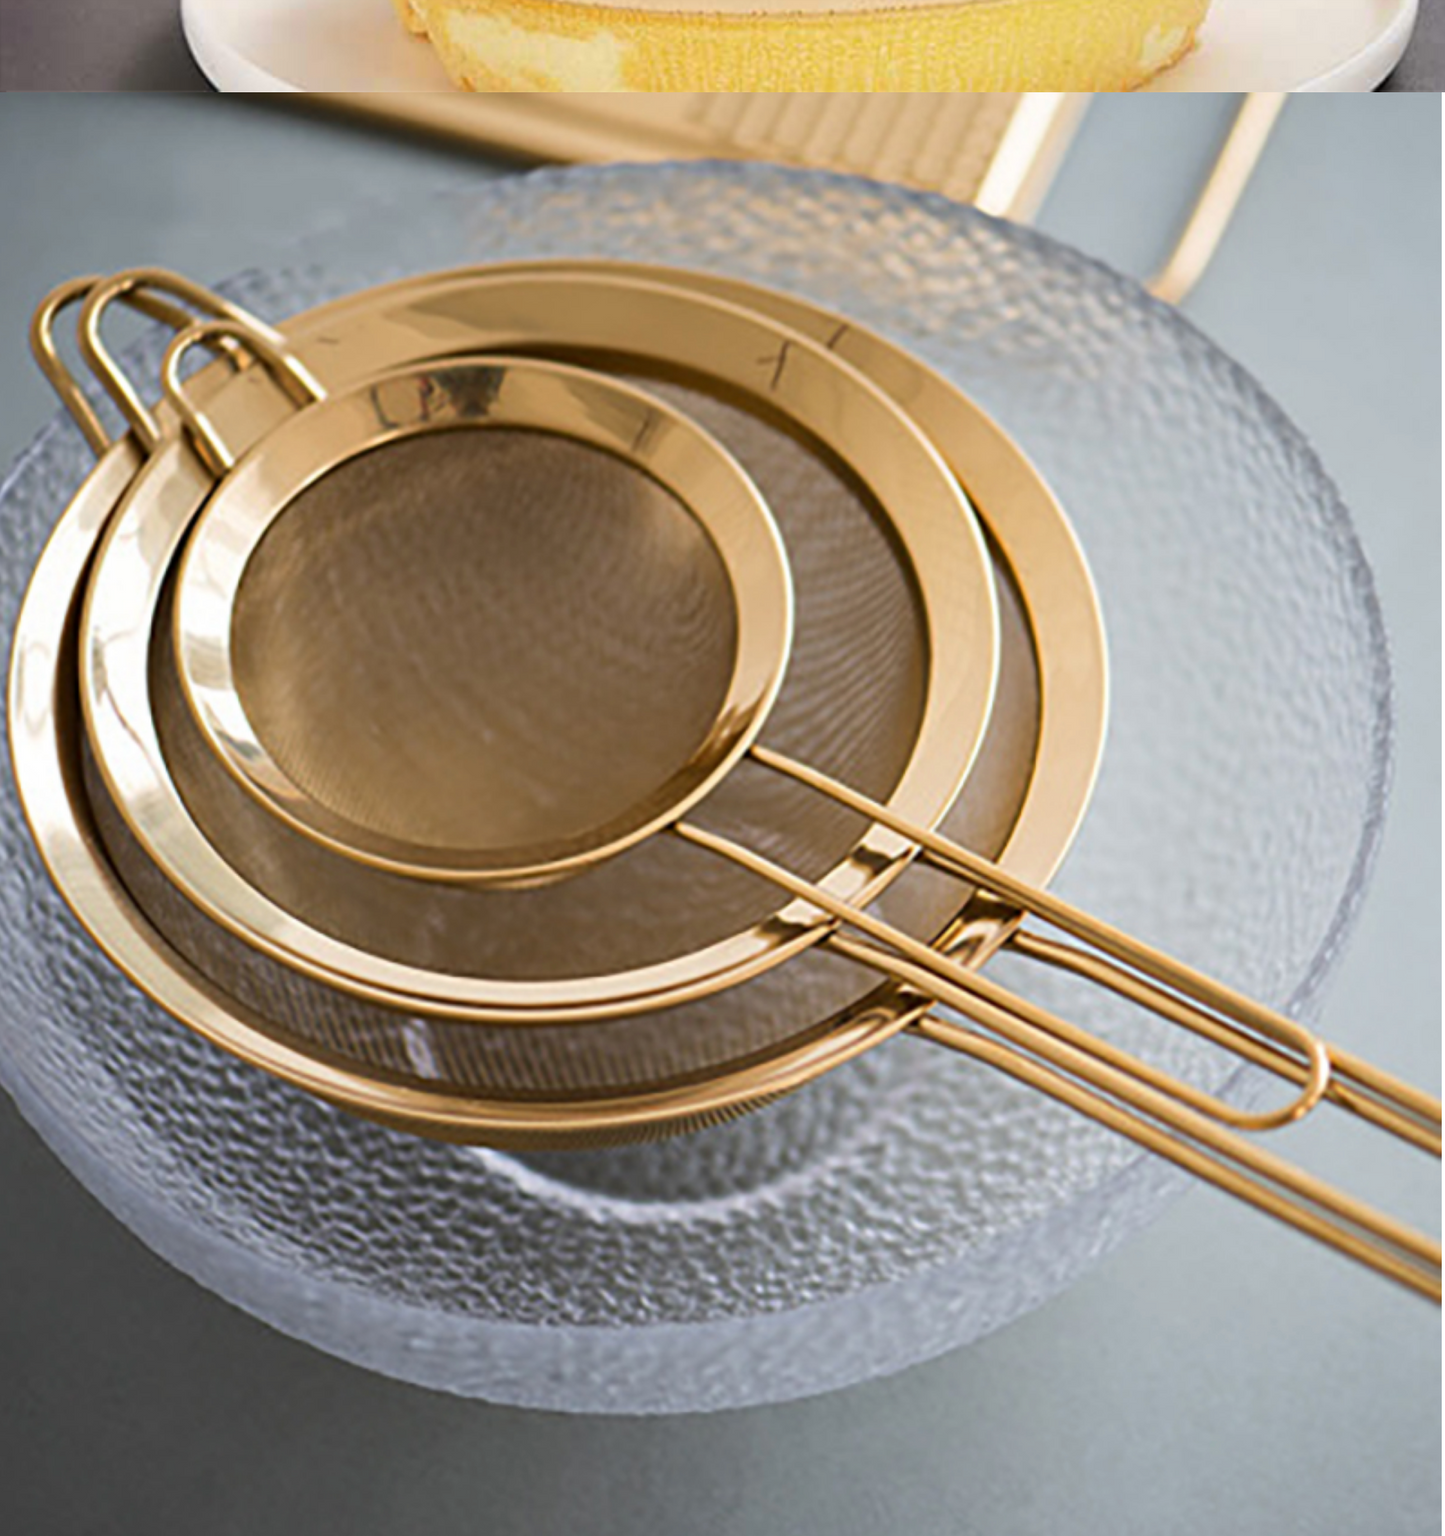 Luxury Rose Gold Sieve - 3 Sizes - Gold or Rose Gold